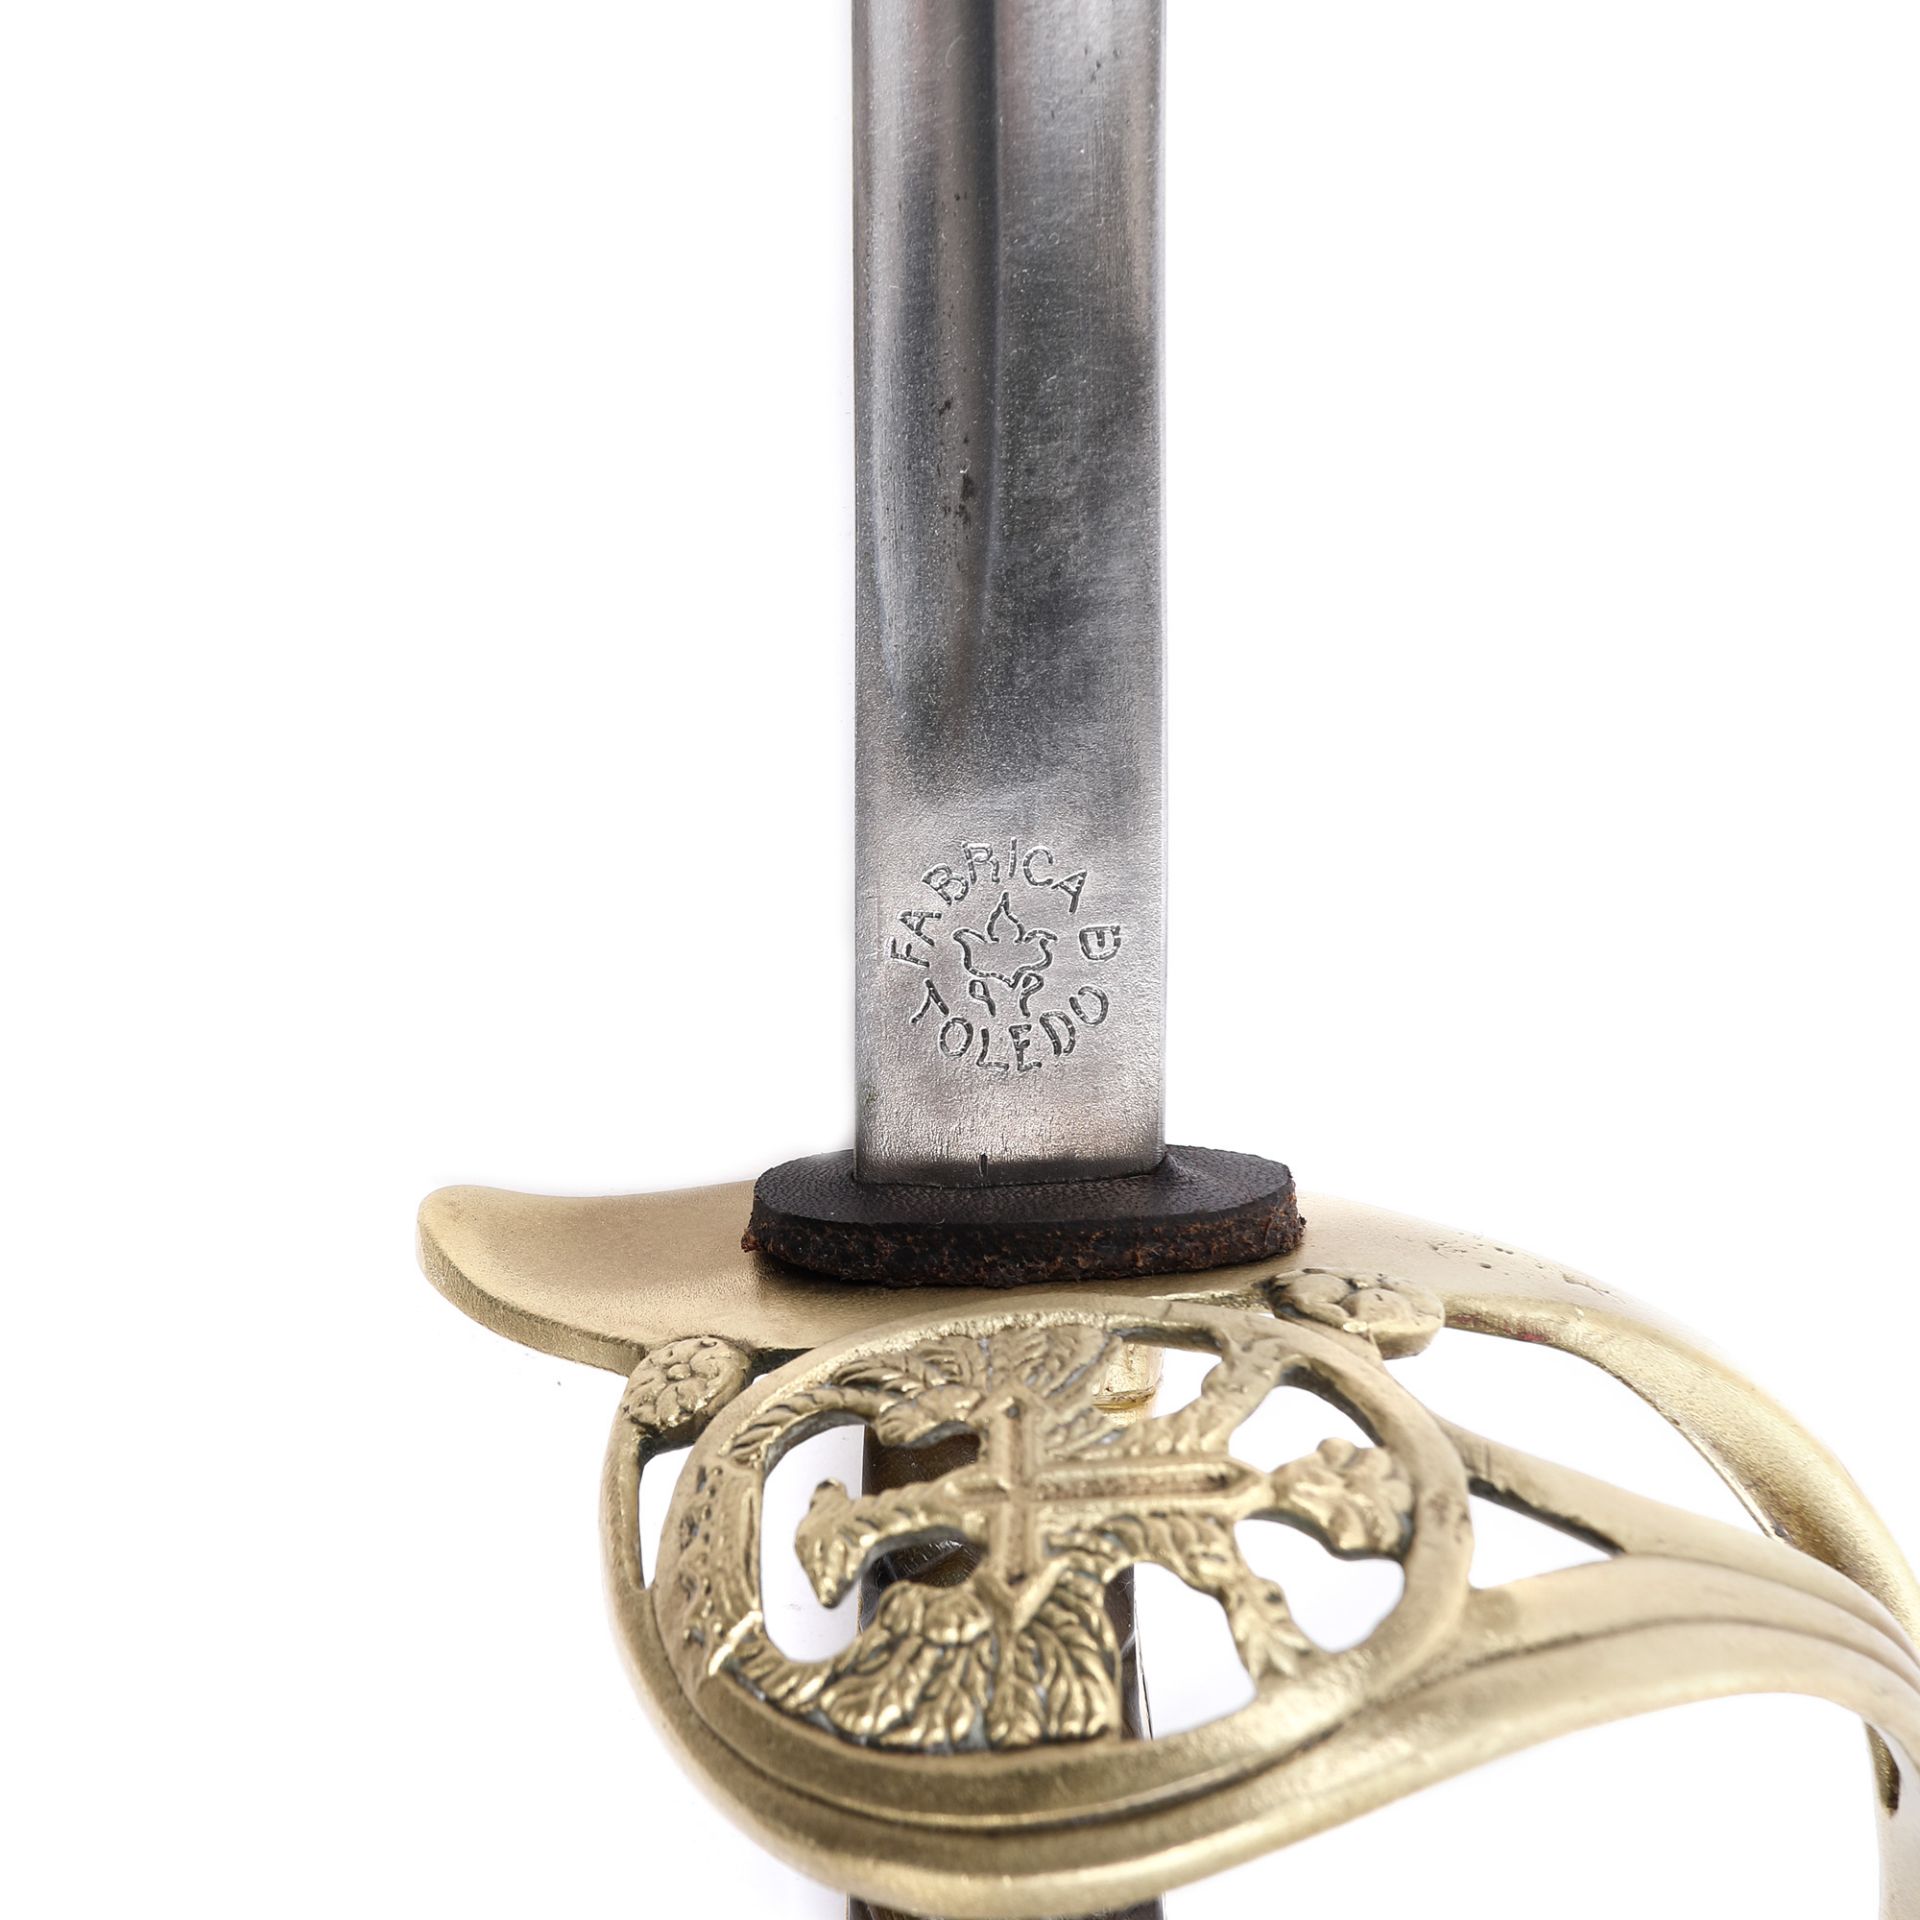 Officer's sword, model 1943, with sheath, Spain, mid-20th century - Image 3 of 3